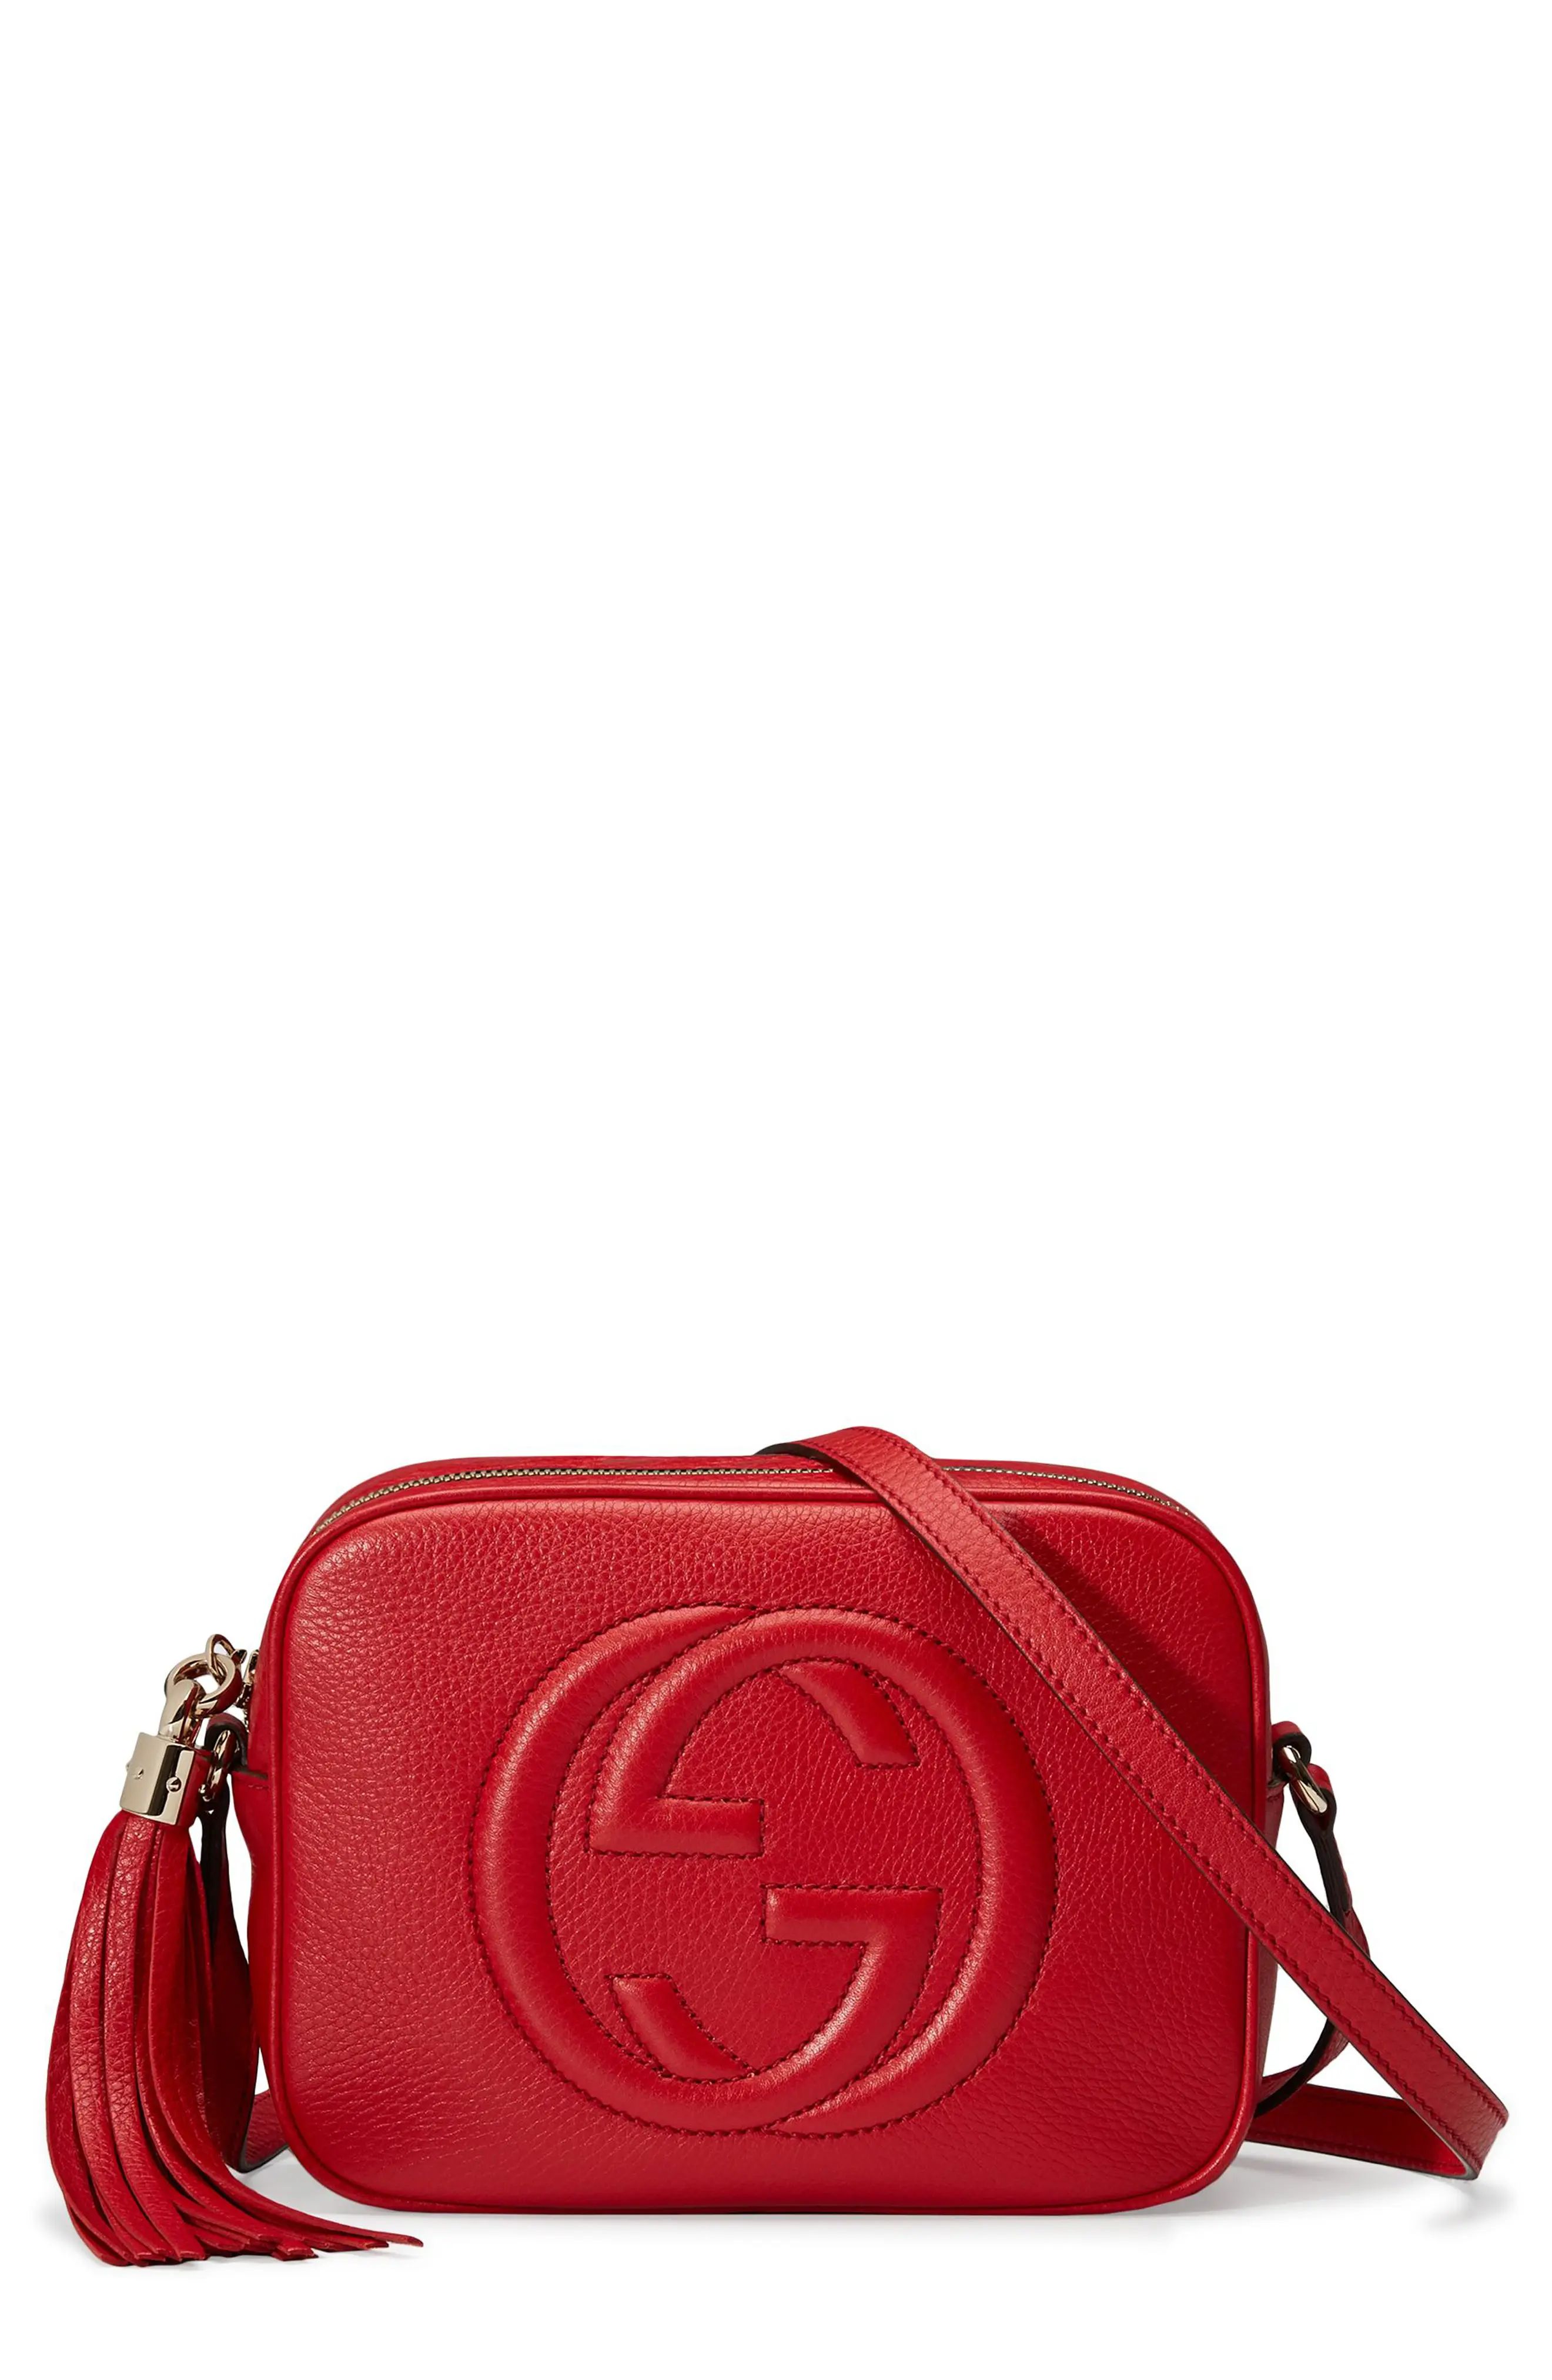 Gucci Soho Disco Leather Bag - Red | Nordstrom